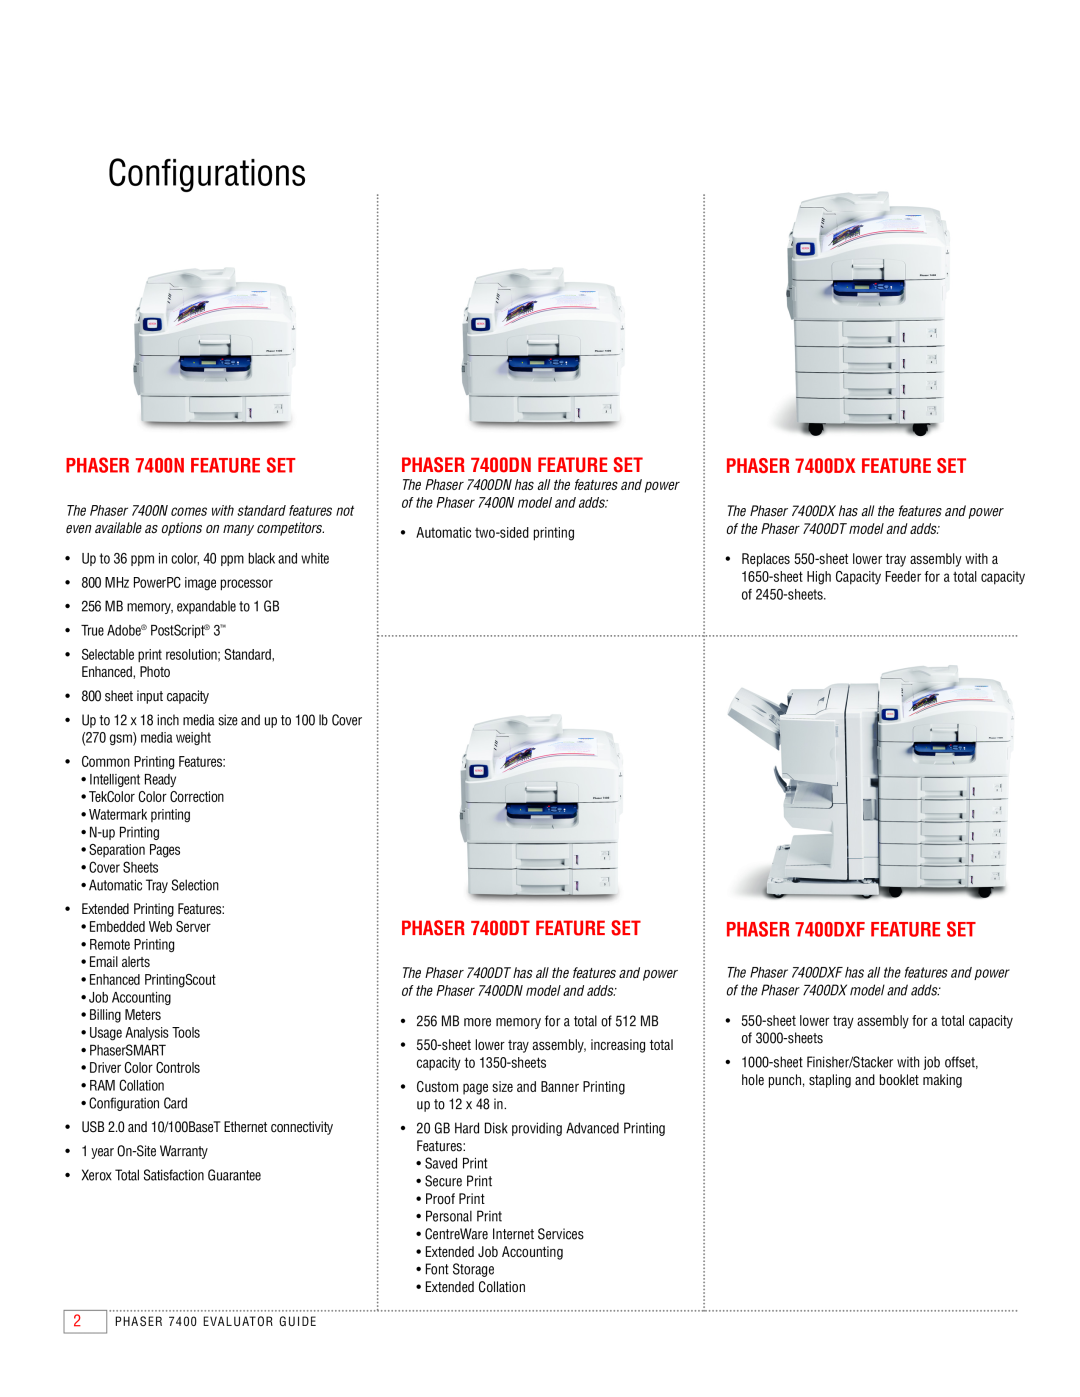 Xerox manual Configurations, PHASER 7400N FEATURE SET, PHASER 7400DN FEATURE SET, PHASER 7400DT FEATURE SET 